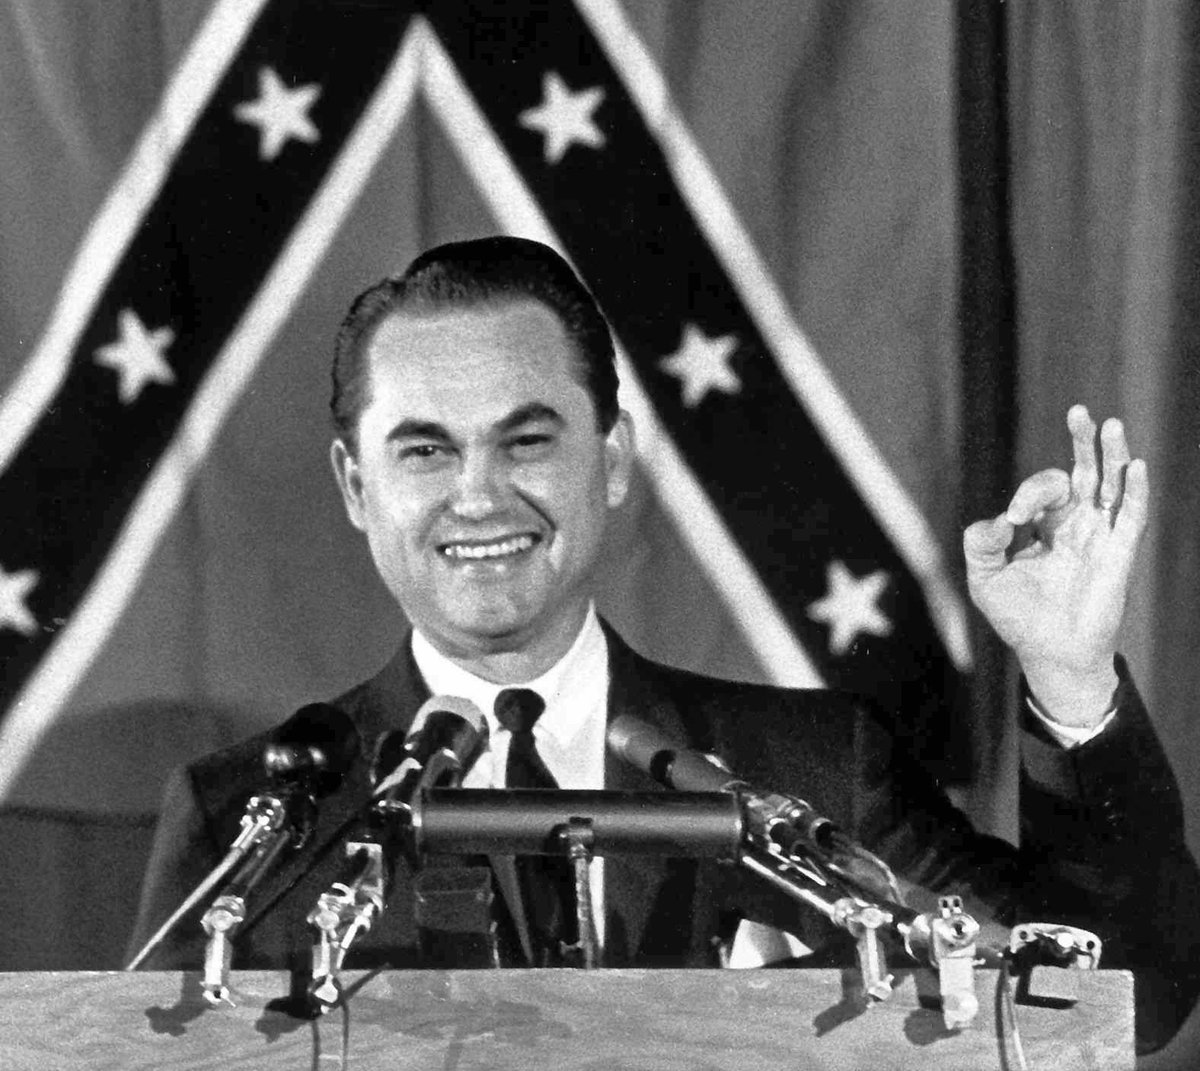 Conventional history flattens this out and makes it seem like white supremacists like George Wallace just opposed segregation on its face, but the claim he made, and others as well, was that Civil Rights was a communist plot using African Americans as pawns against America.14/